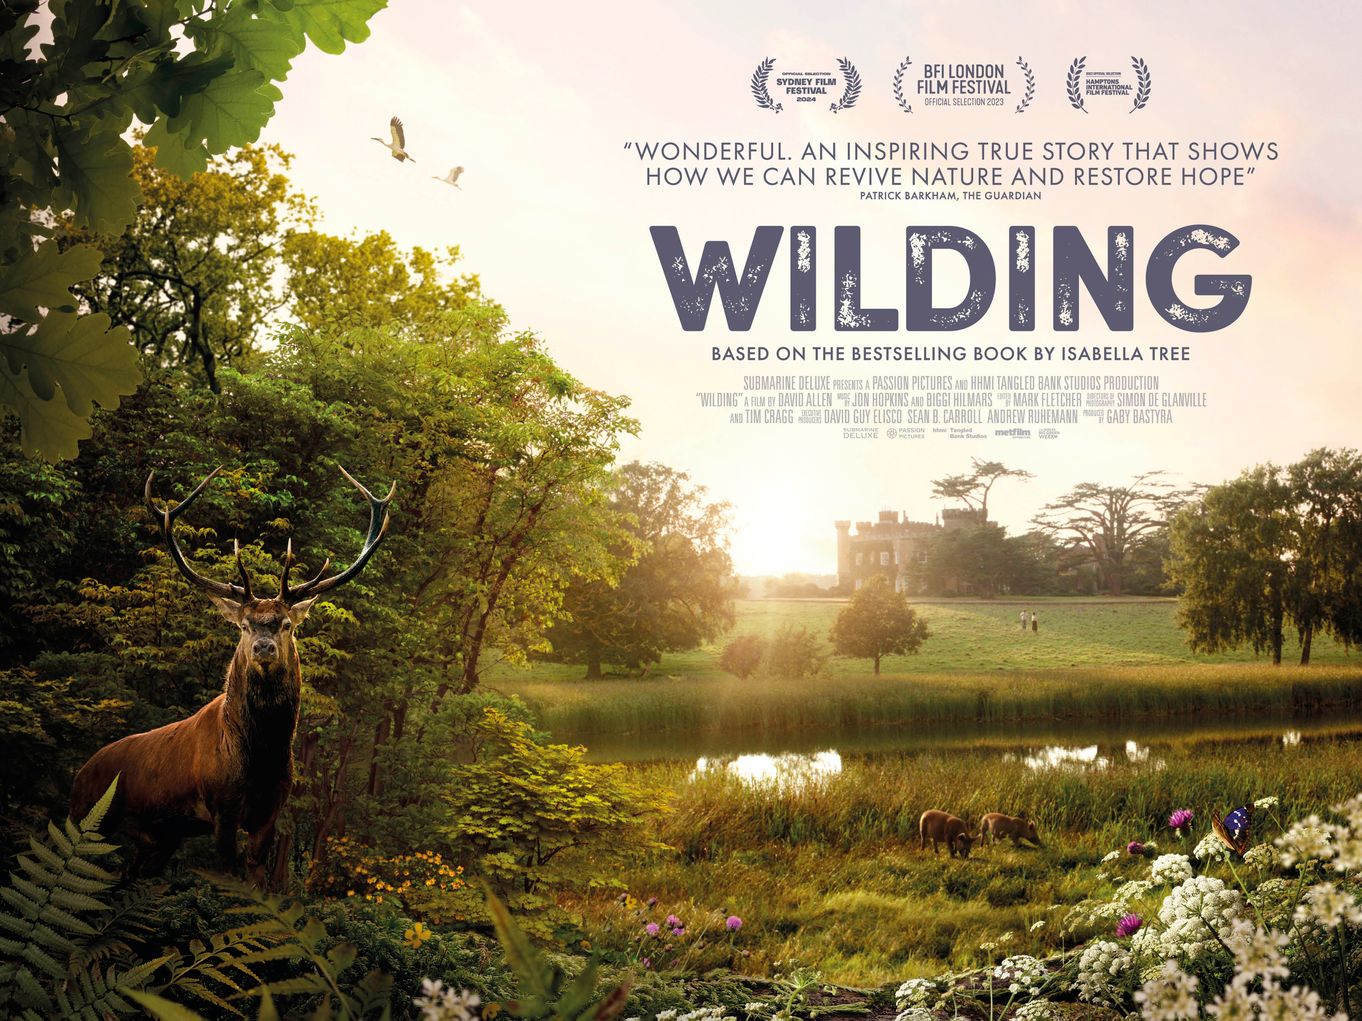 Wilding Film Plus Q&A followed by “Wilding the Eastern Lakes” with Lee Schofield